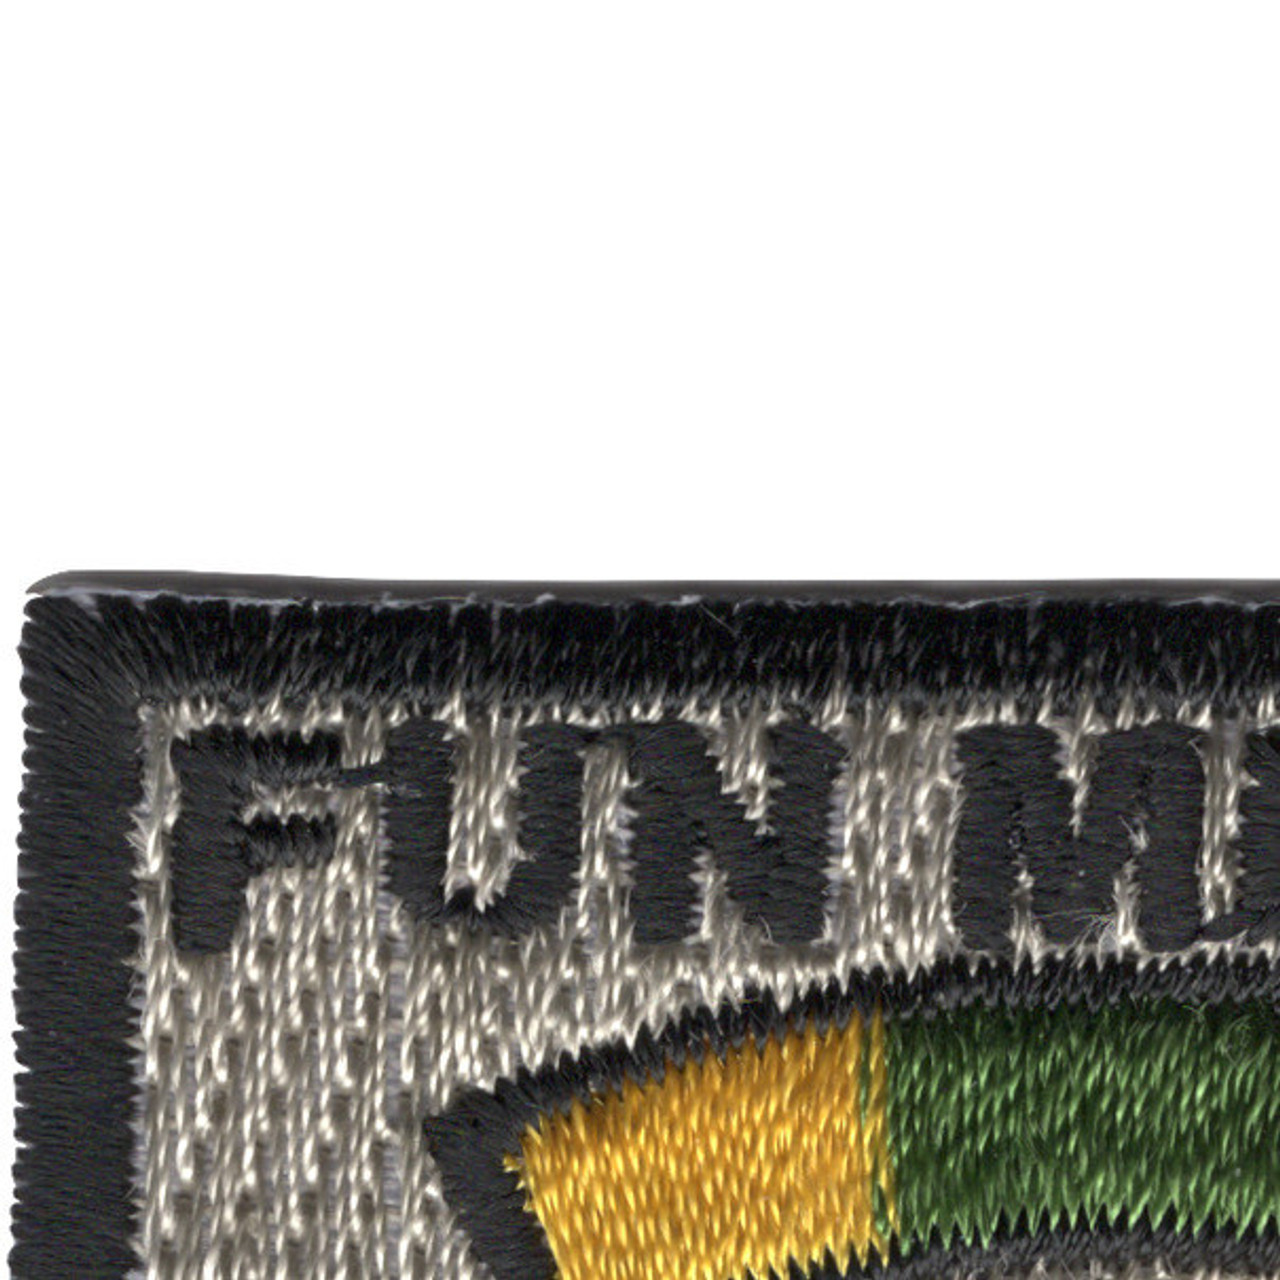 Funny Velcro Patch -  FUN METER  White Small Airsoft Tiger111HK Area